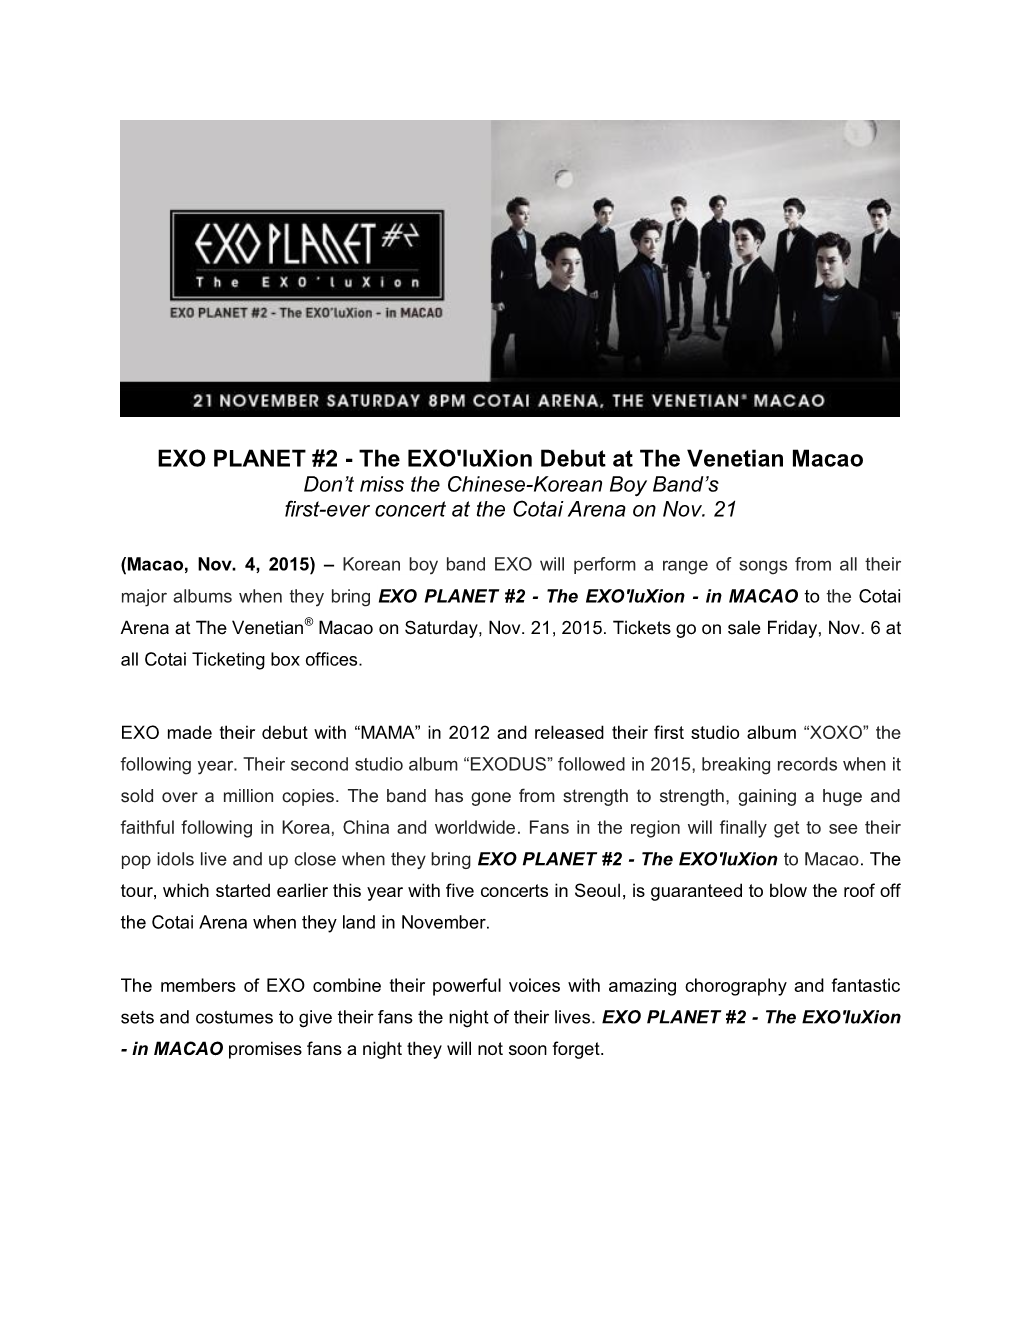 EXO PLANET #2 - the EXO'luxion Debut at the Venetian Macao Don’T Miss the Chinese-Korean Boy Band’S First-Ever Concert at the Cotai Arena on Nov